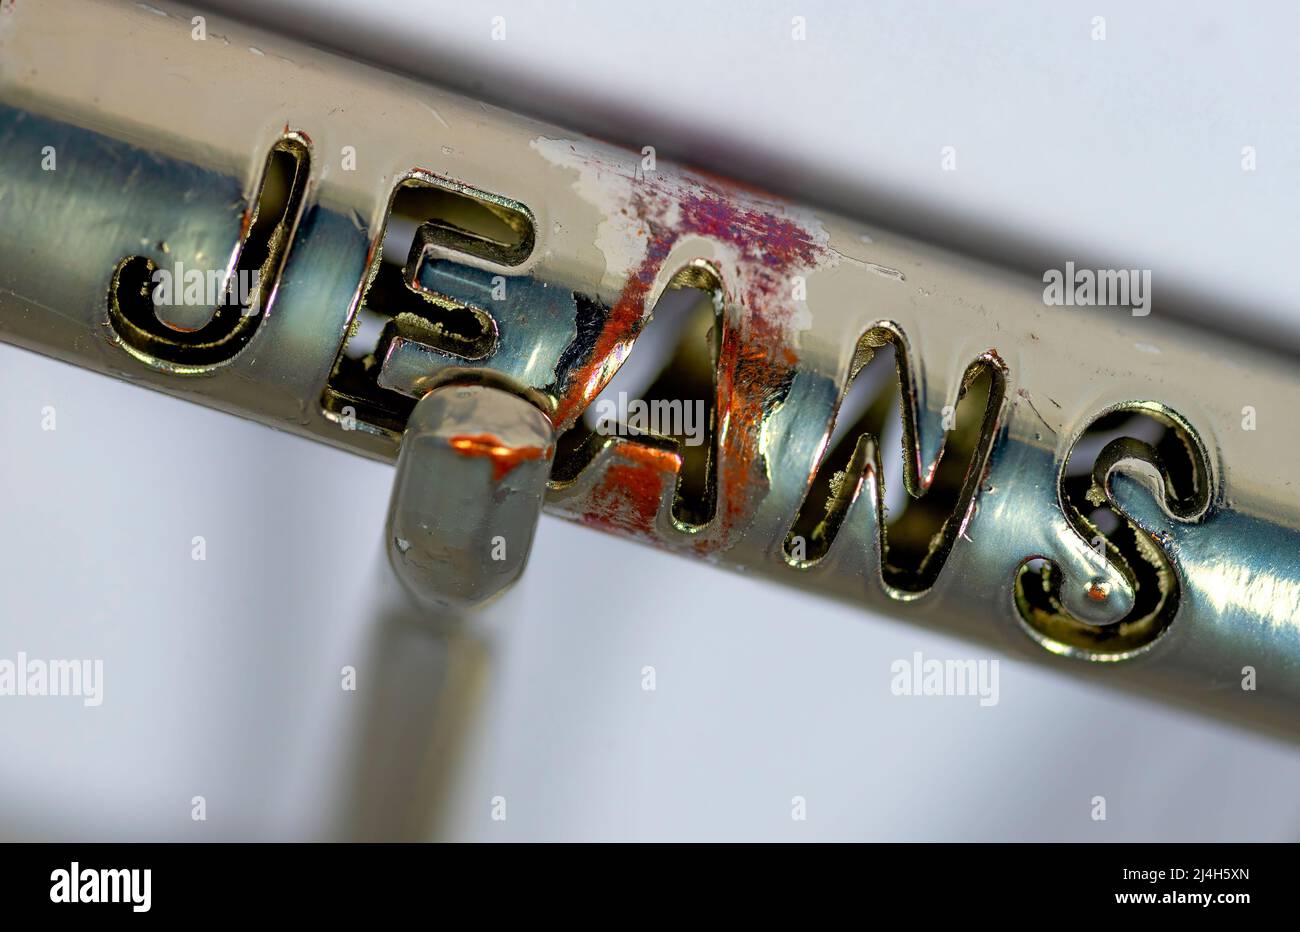 near view of the punched out word 'JEANS' on an used metallic belt buckle Stock Photo